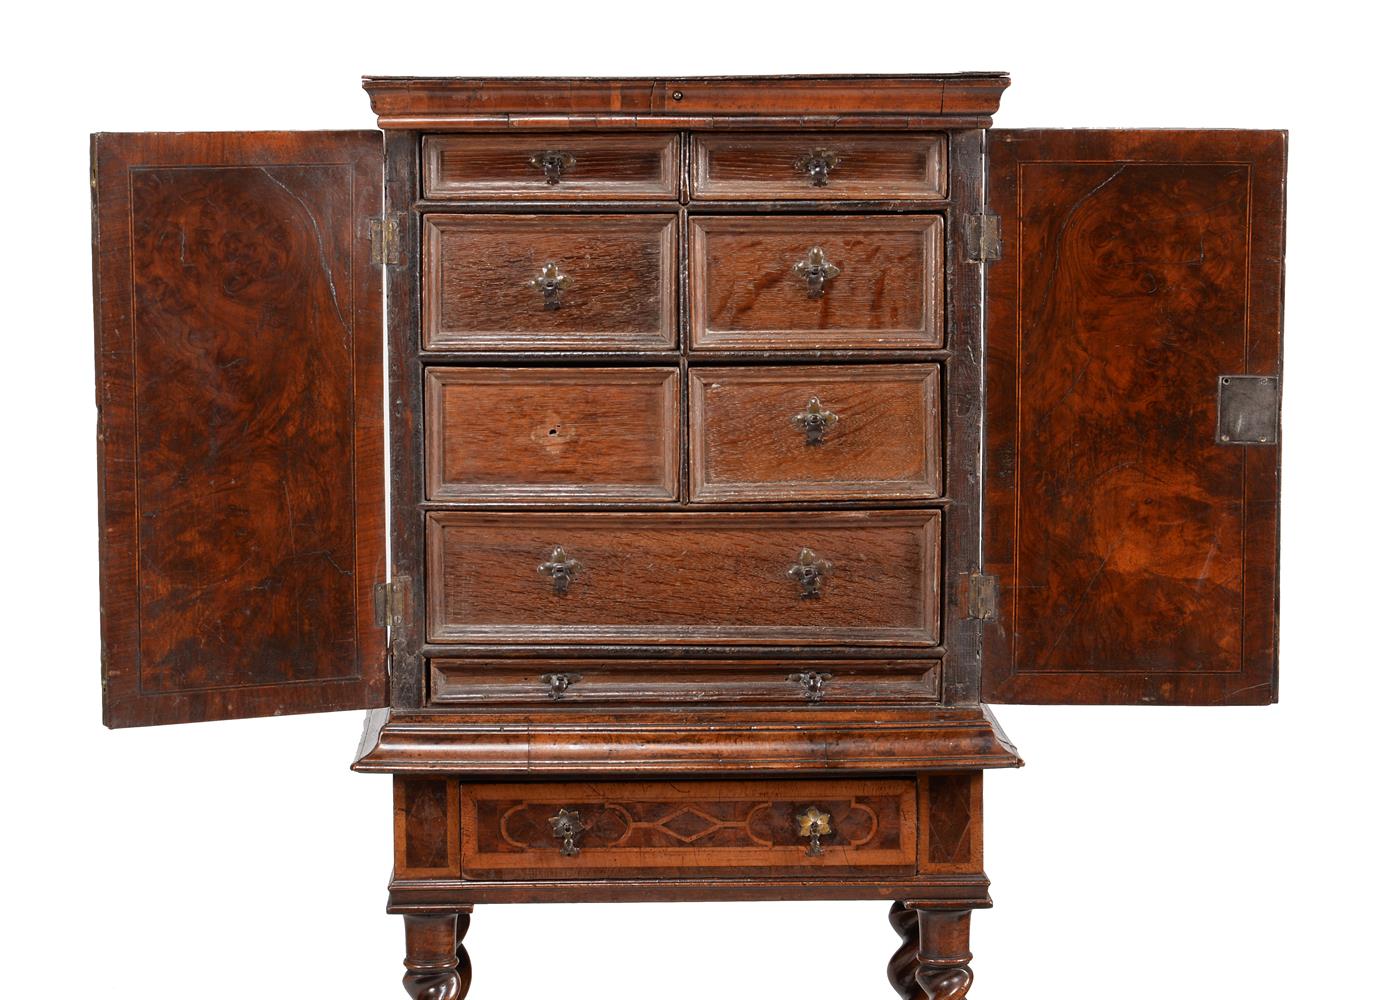 A CHARLES II YEW OYSTER VENEERED AND HOLLY BANDED CABINET - Image 7 of 9